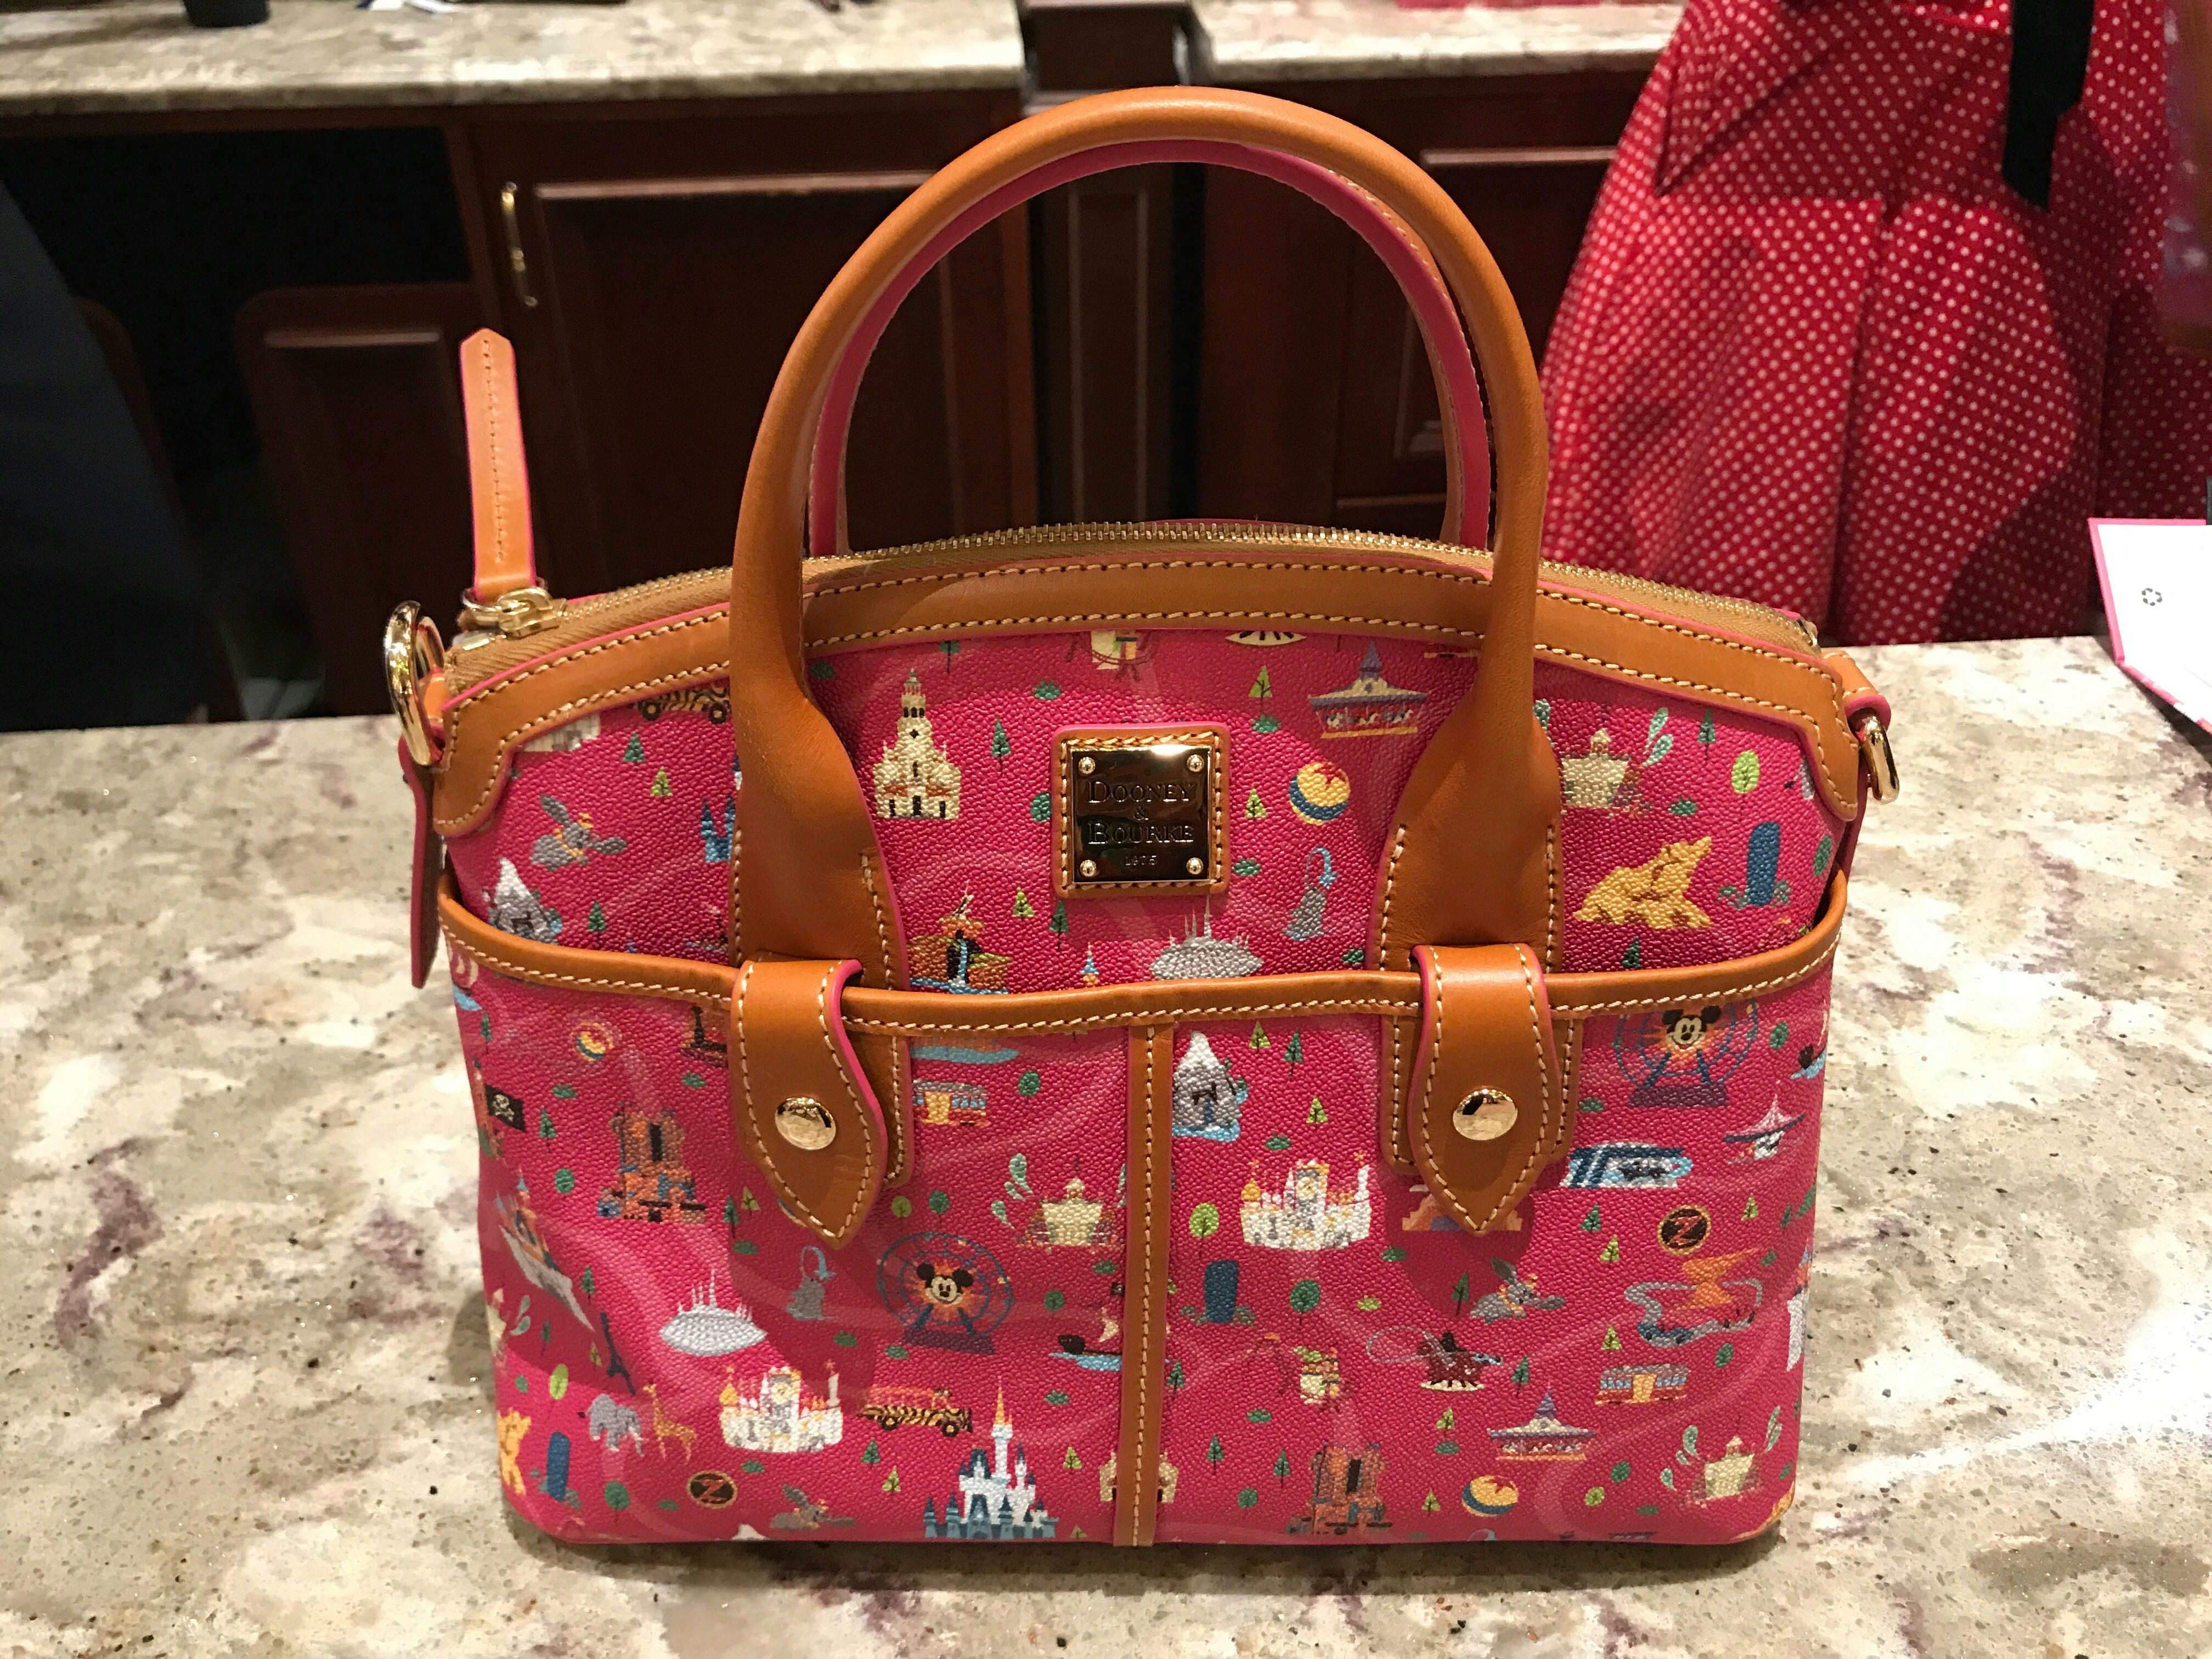 New Fantasyland Dooney & Bourke Bags Available at Walt Disney World - WDW  News Today